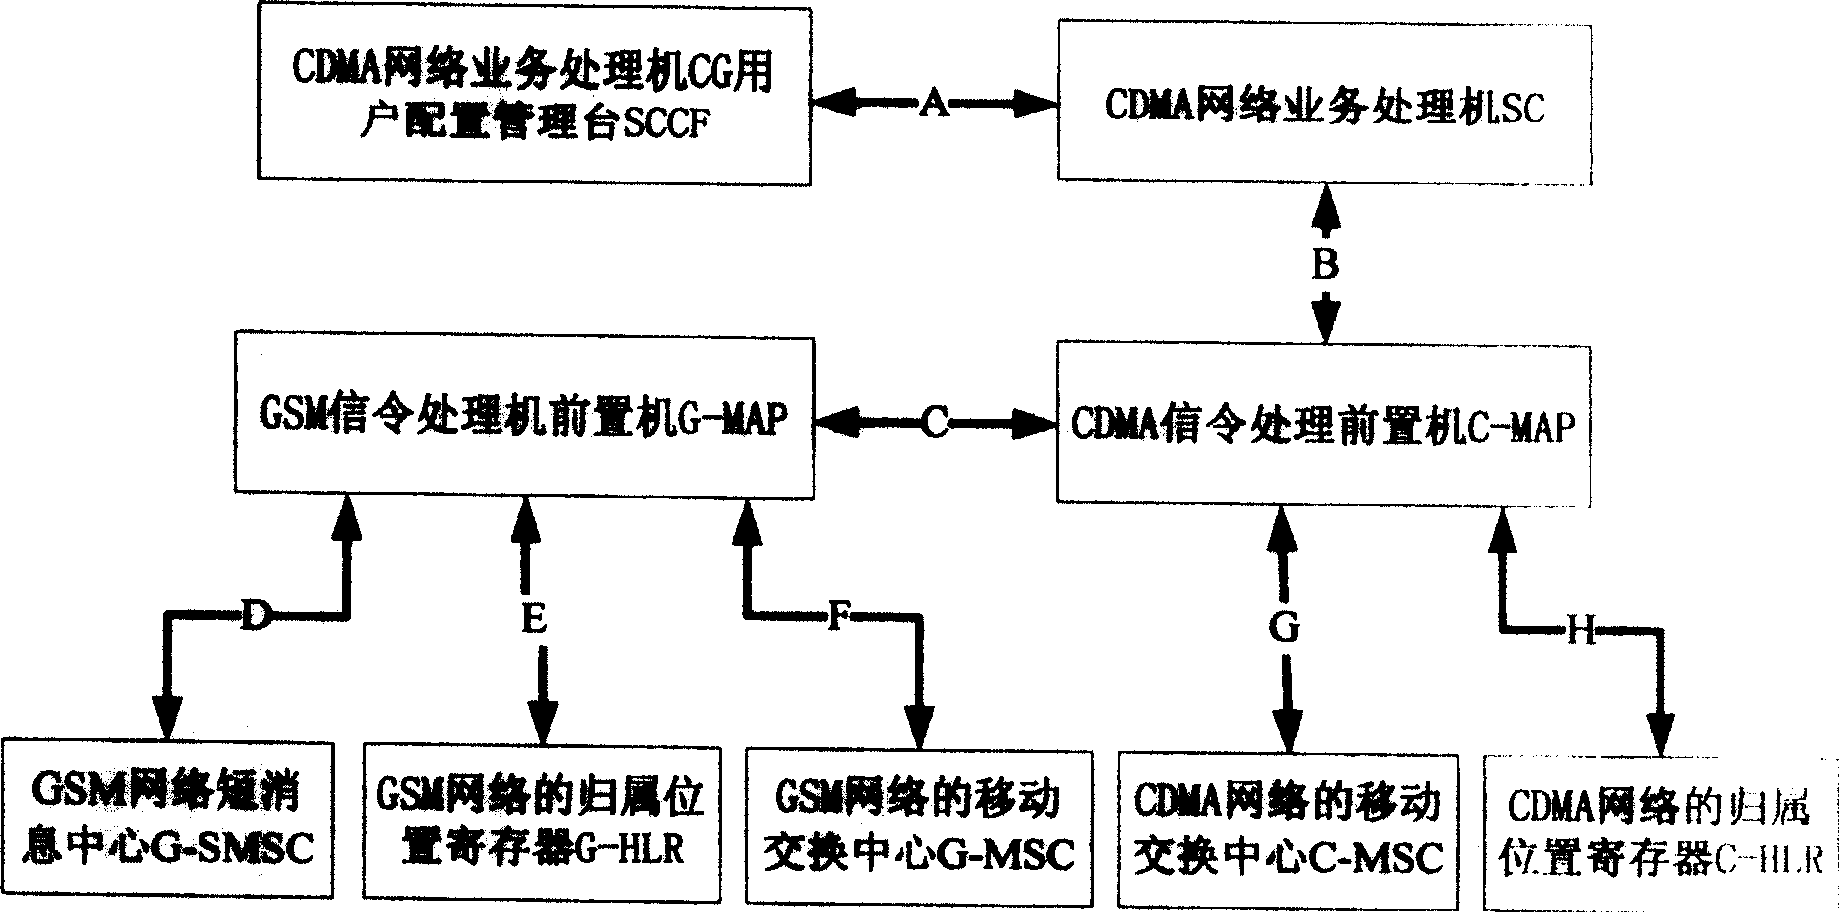 A gateway and method for SMS intercommunication between the CDMA and GSM